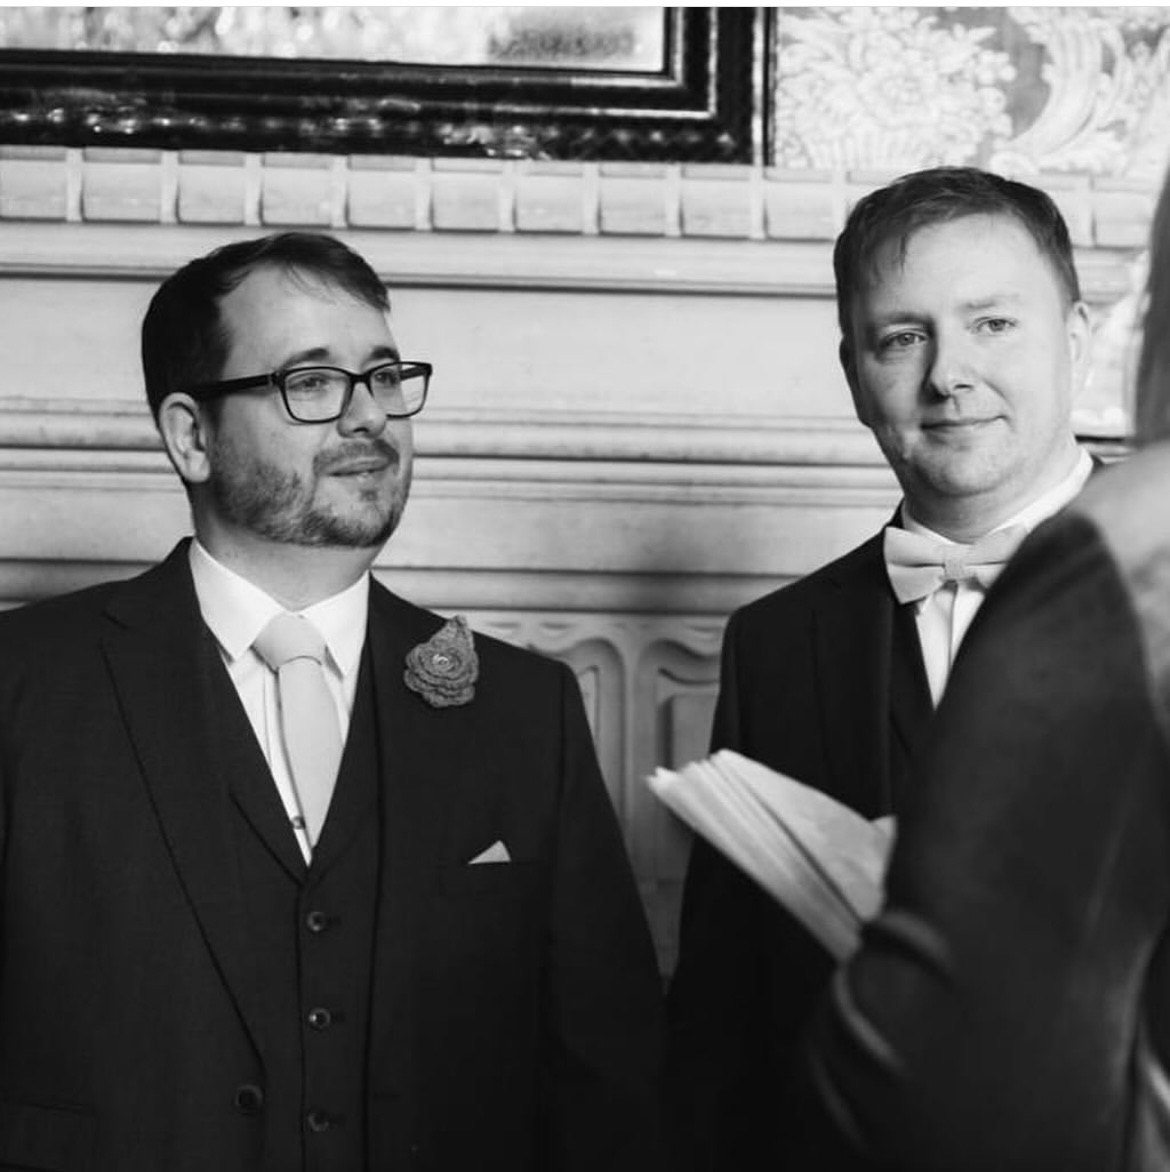 Real Wedding Image for Mr & Mr Rees